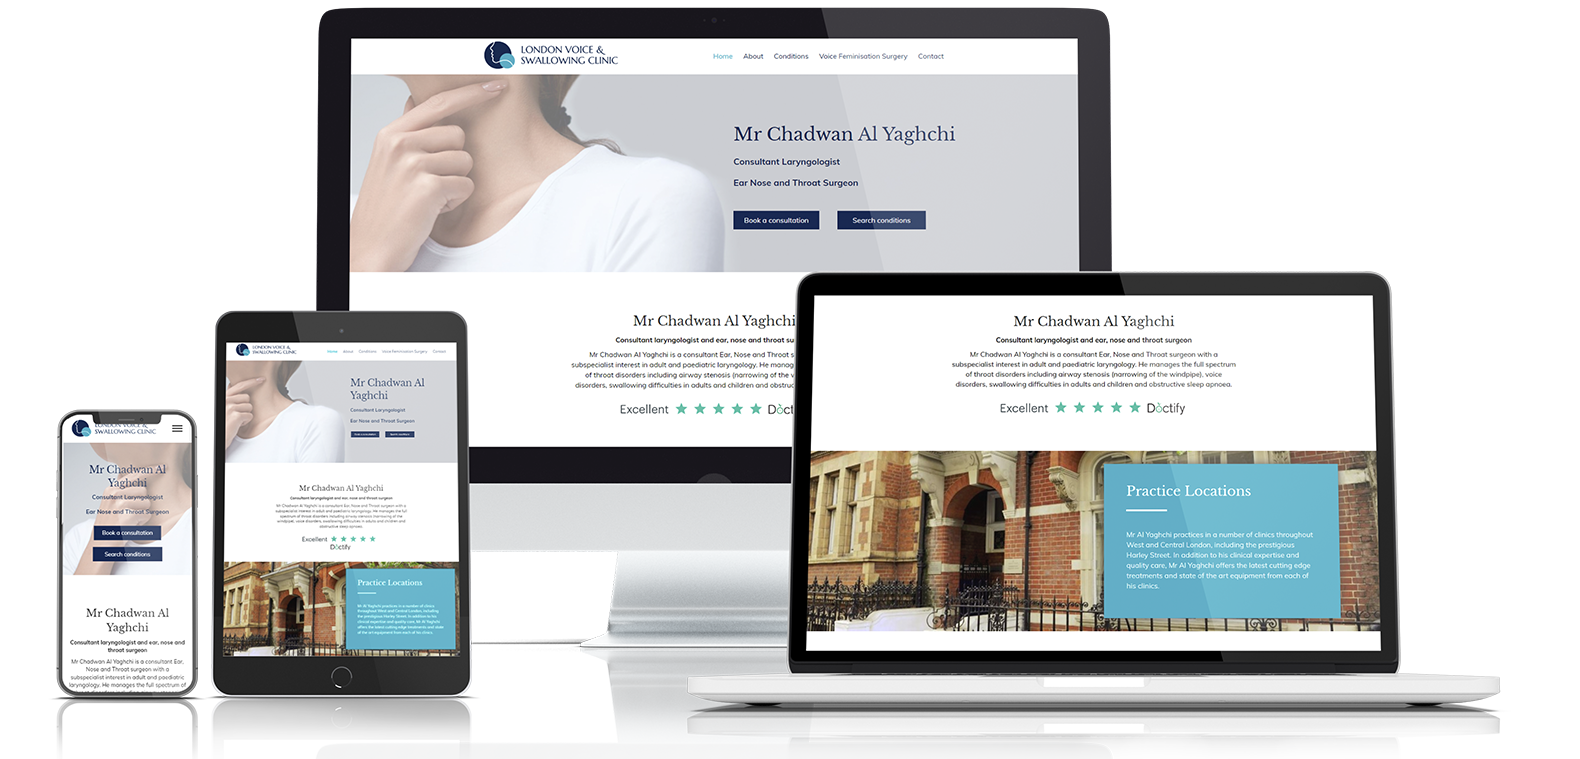 London Voice and Swallowing Clinic | Healthcare Website Design | MEDICO ...